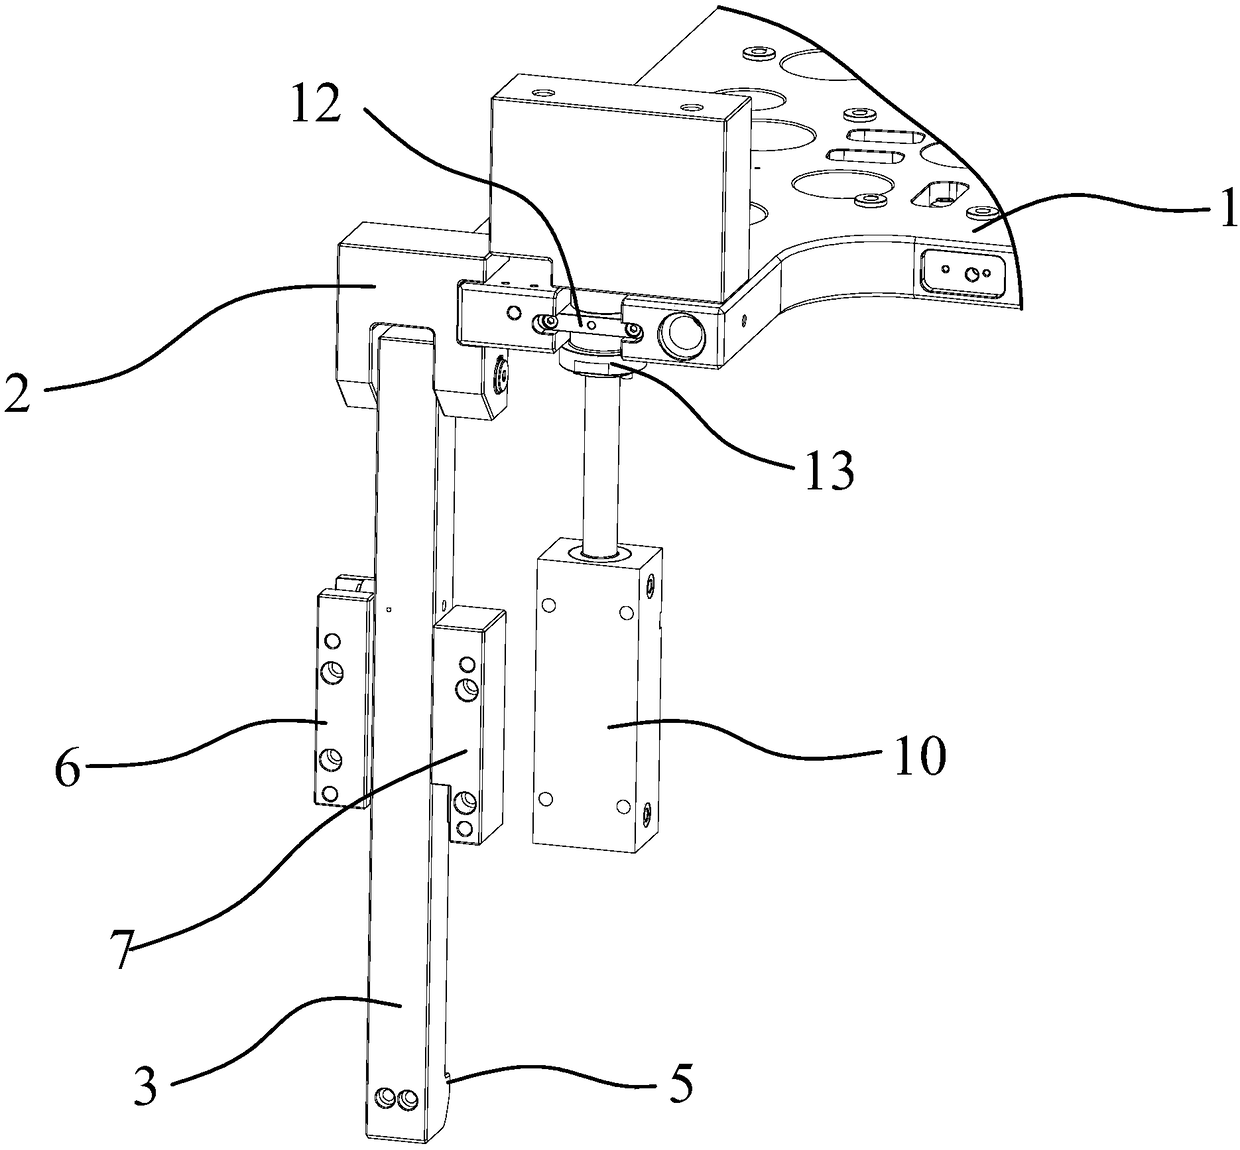 Drag hook structure of instrument panel mold